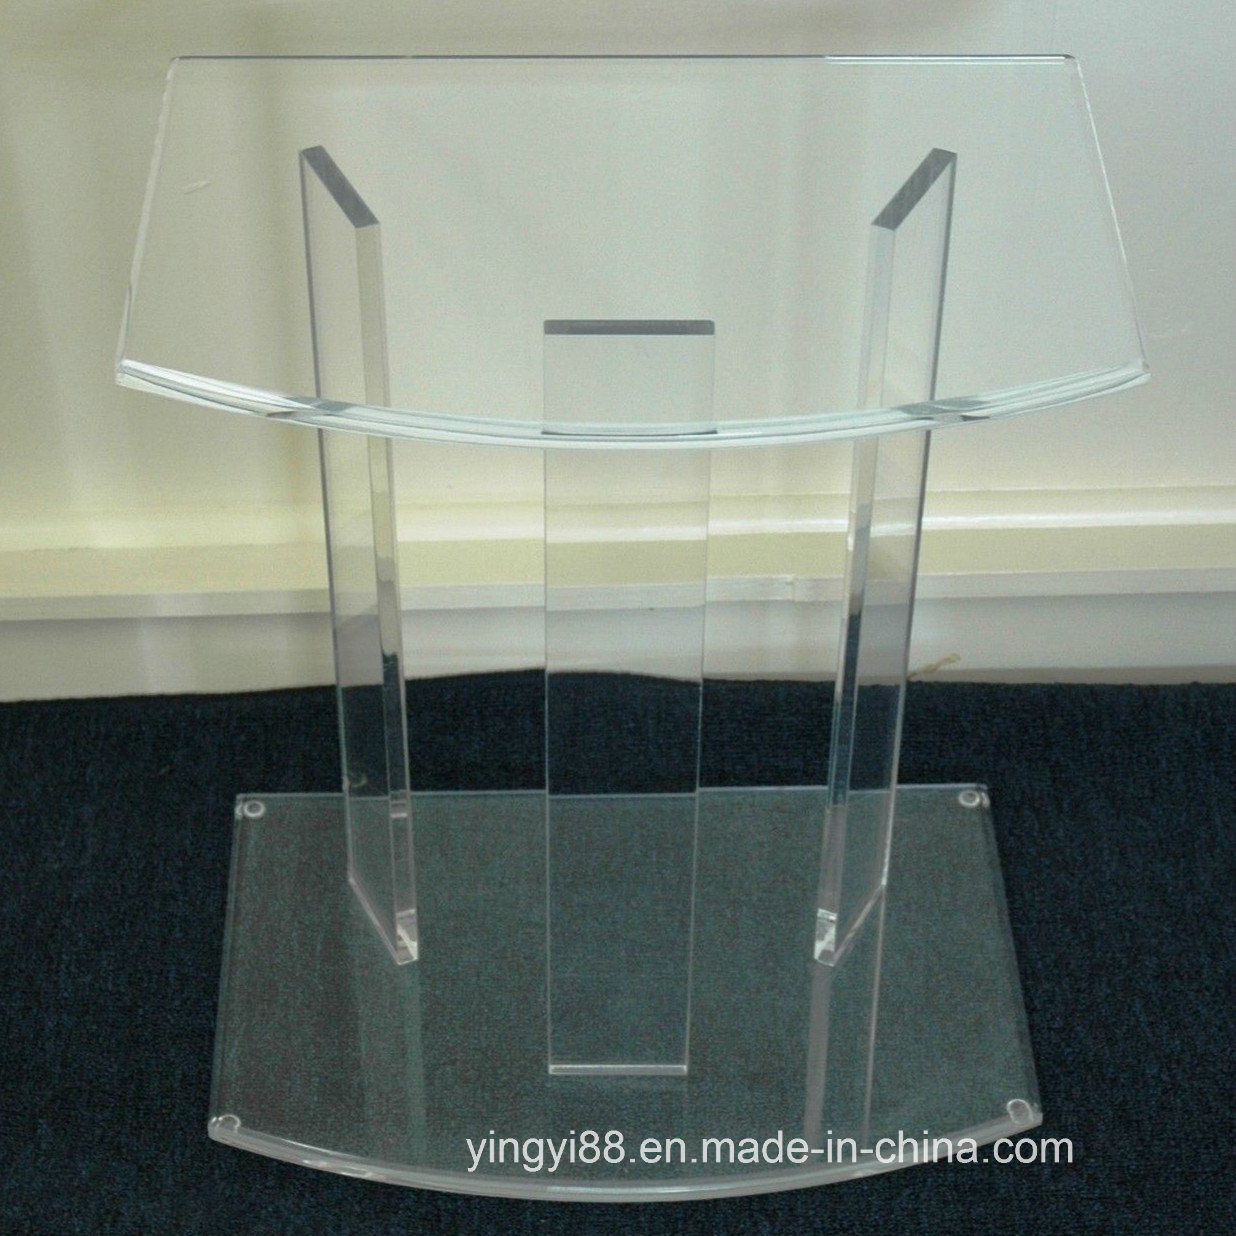 /proimages/2f0j00RNbQZKGMCPpe/2018-new-acrylic-table-crystal-furniture-baby-furniture.jpg